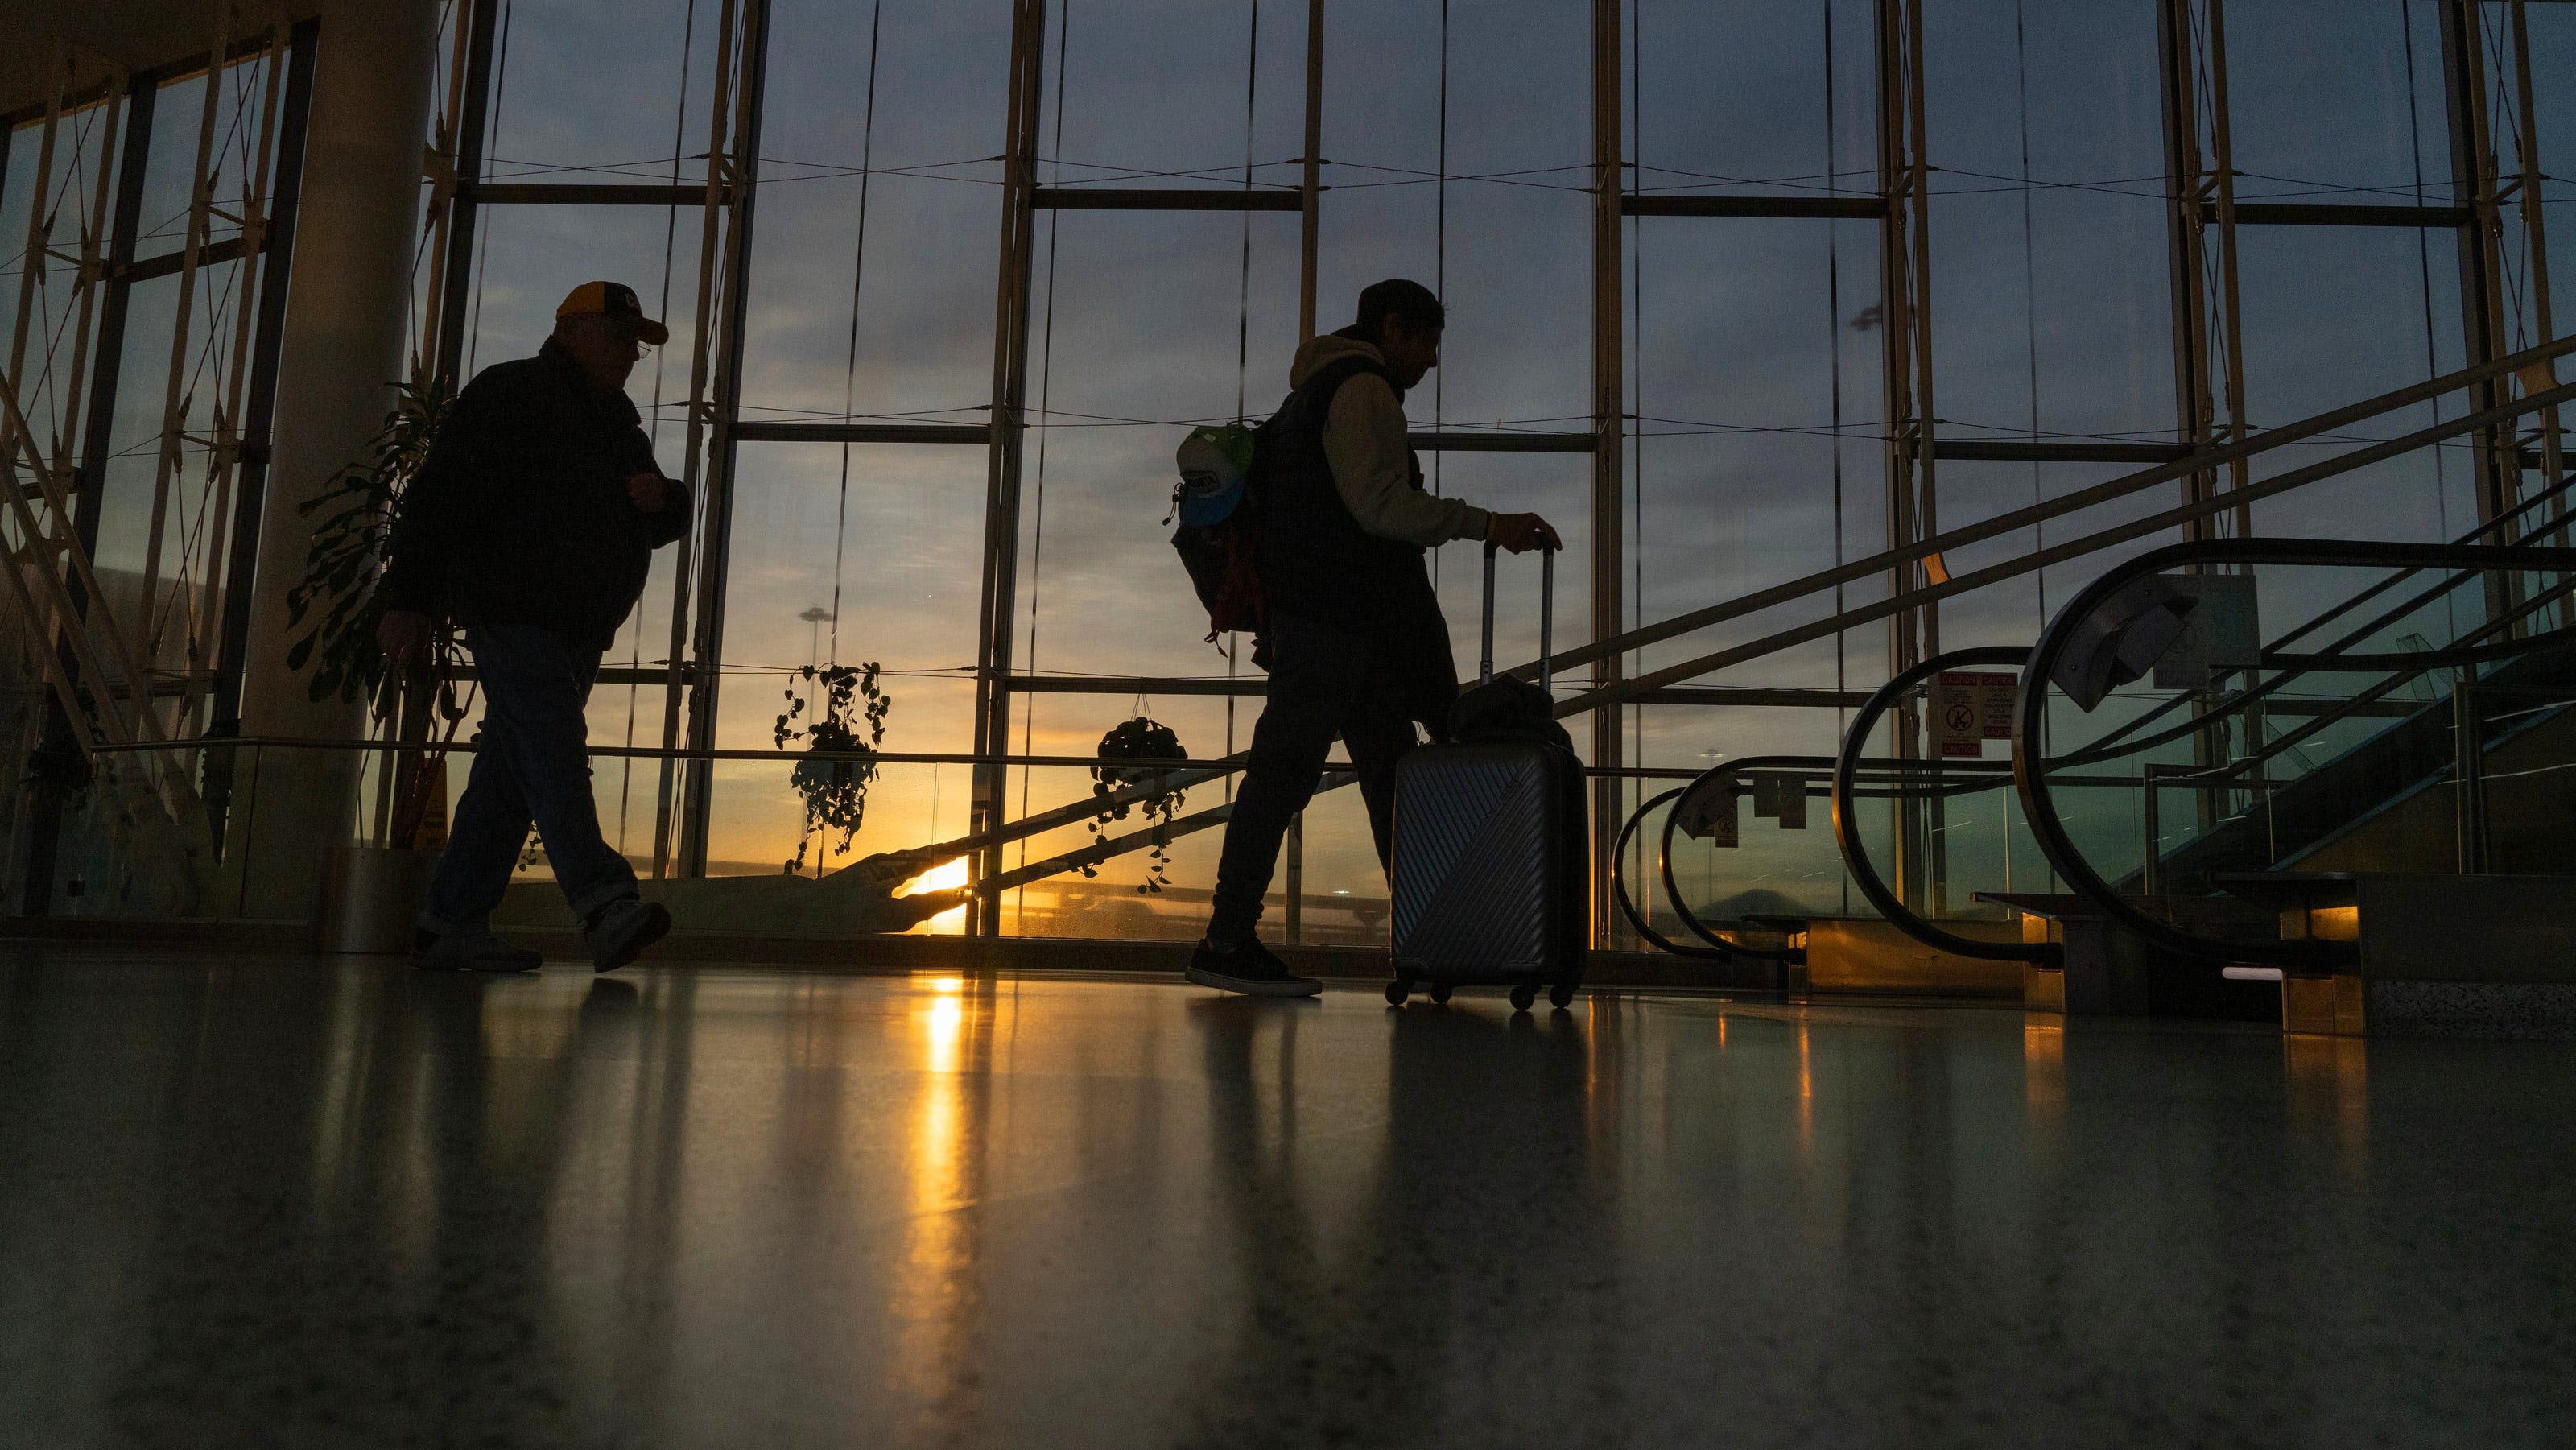 This is the most stressful airport in the US, according to a new report